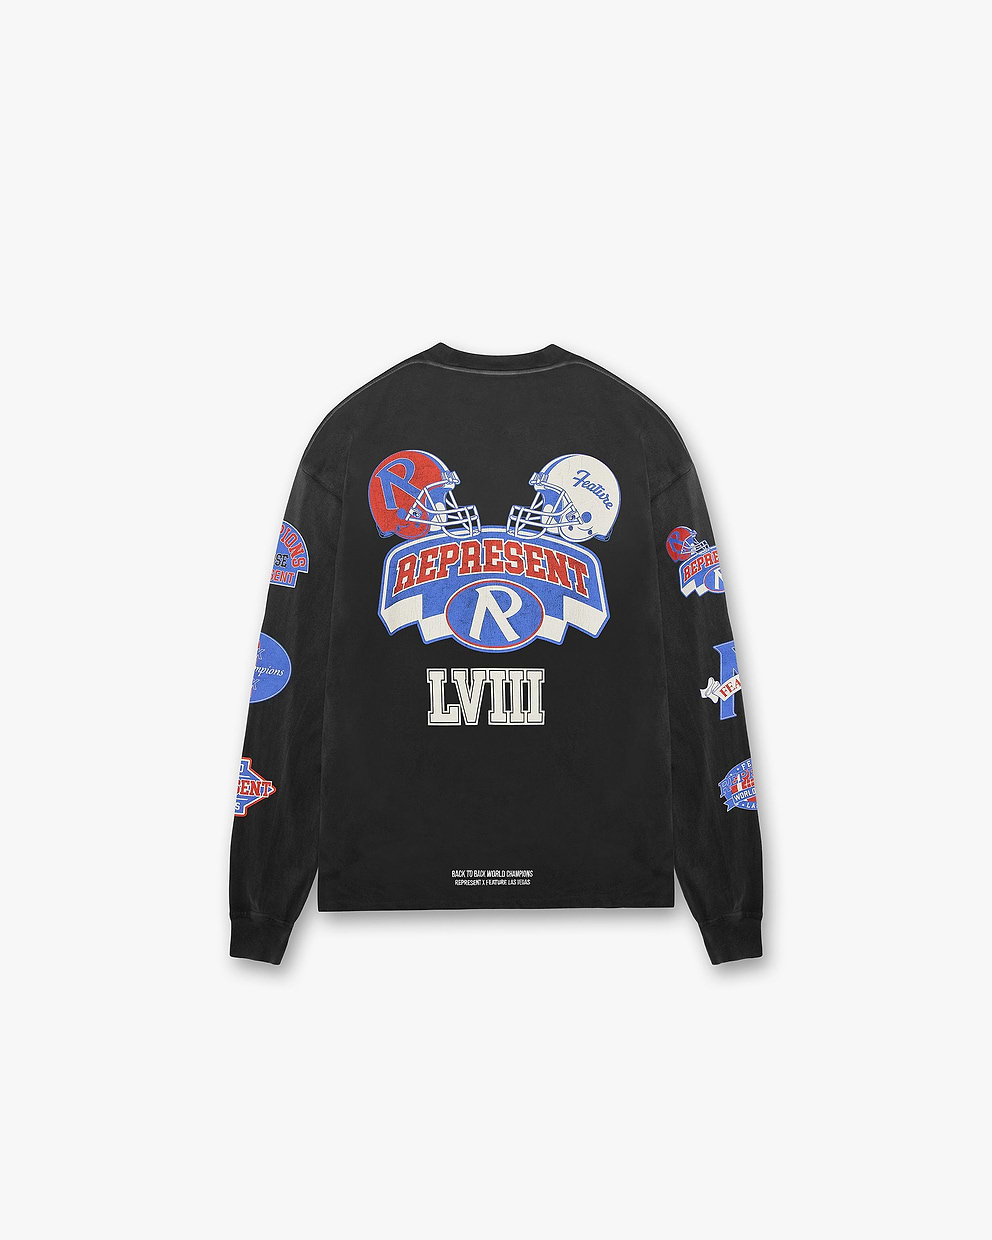 Represent X Feature Champions Long Sleeve T-Shirt - Stained Black